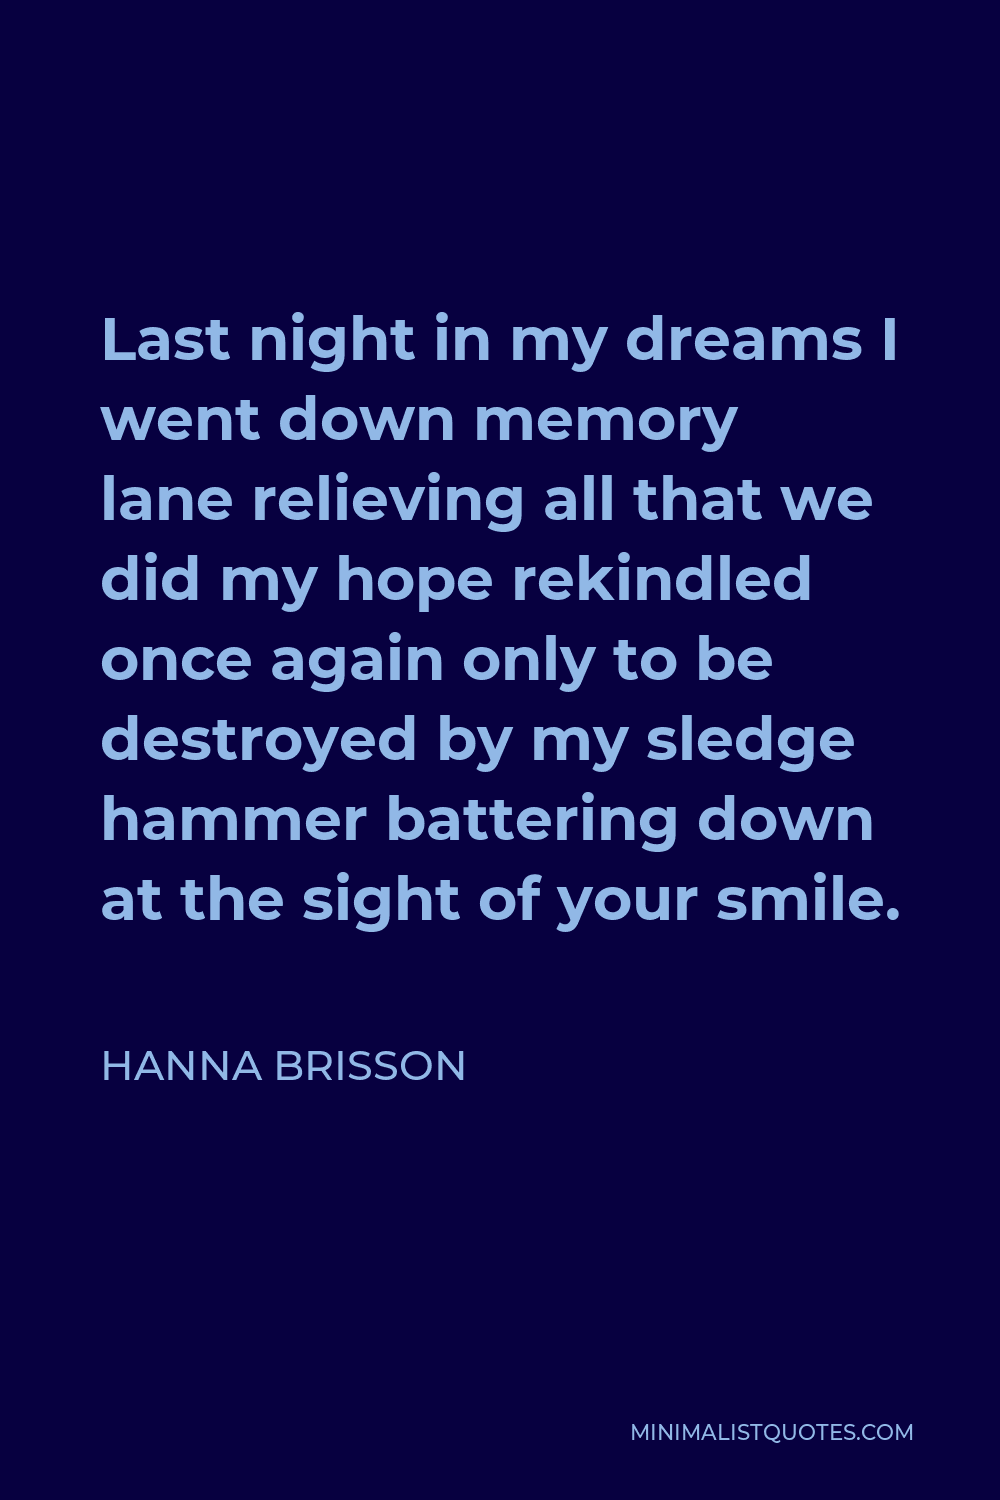 Hanna Brisson Quote - Last night in my dreams I went down memory lane relieving all that we did my hope rekindled once again only to be destroyed by my sledge hammer battering down at the sight of your smile.